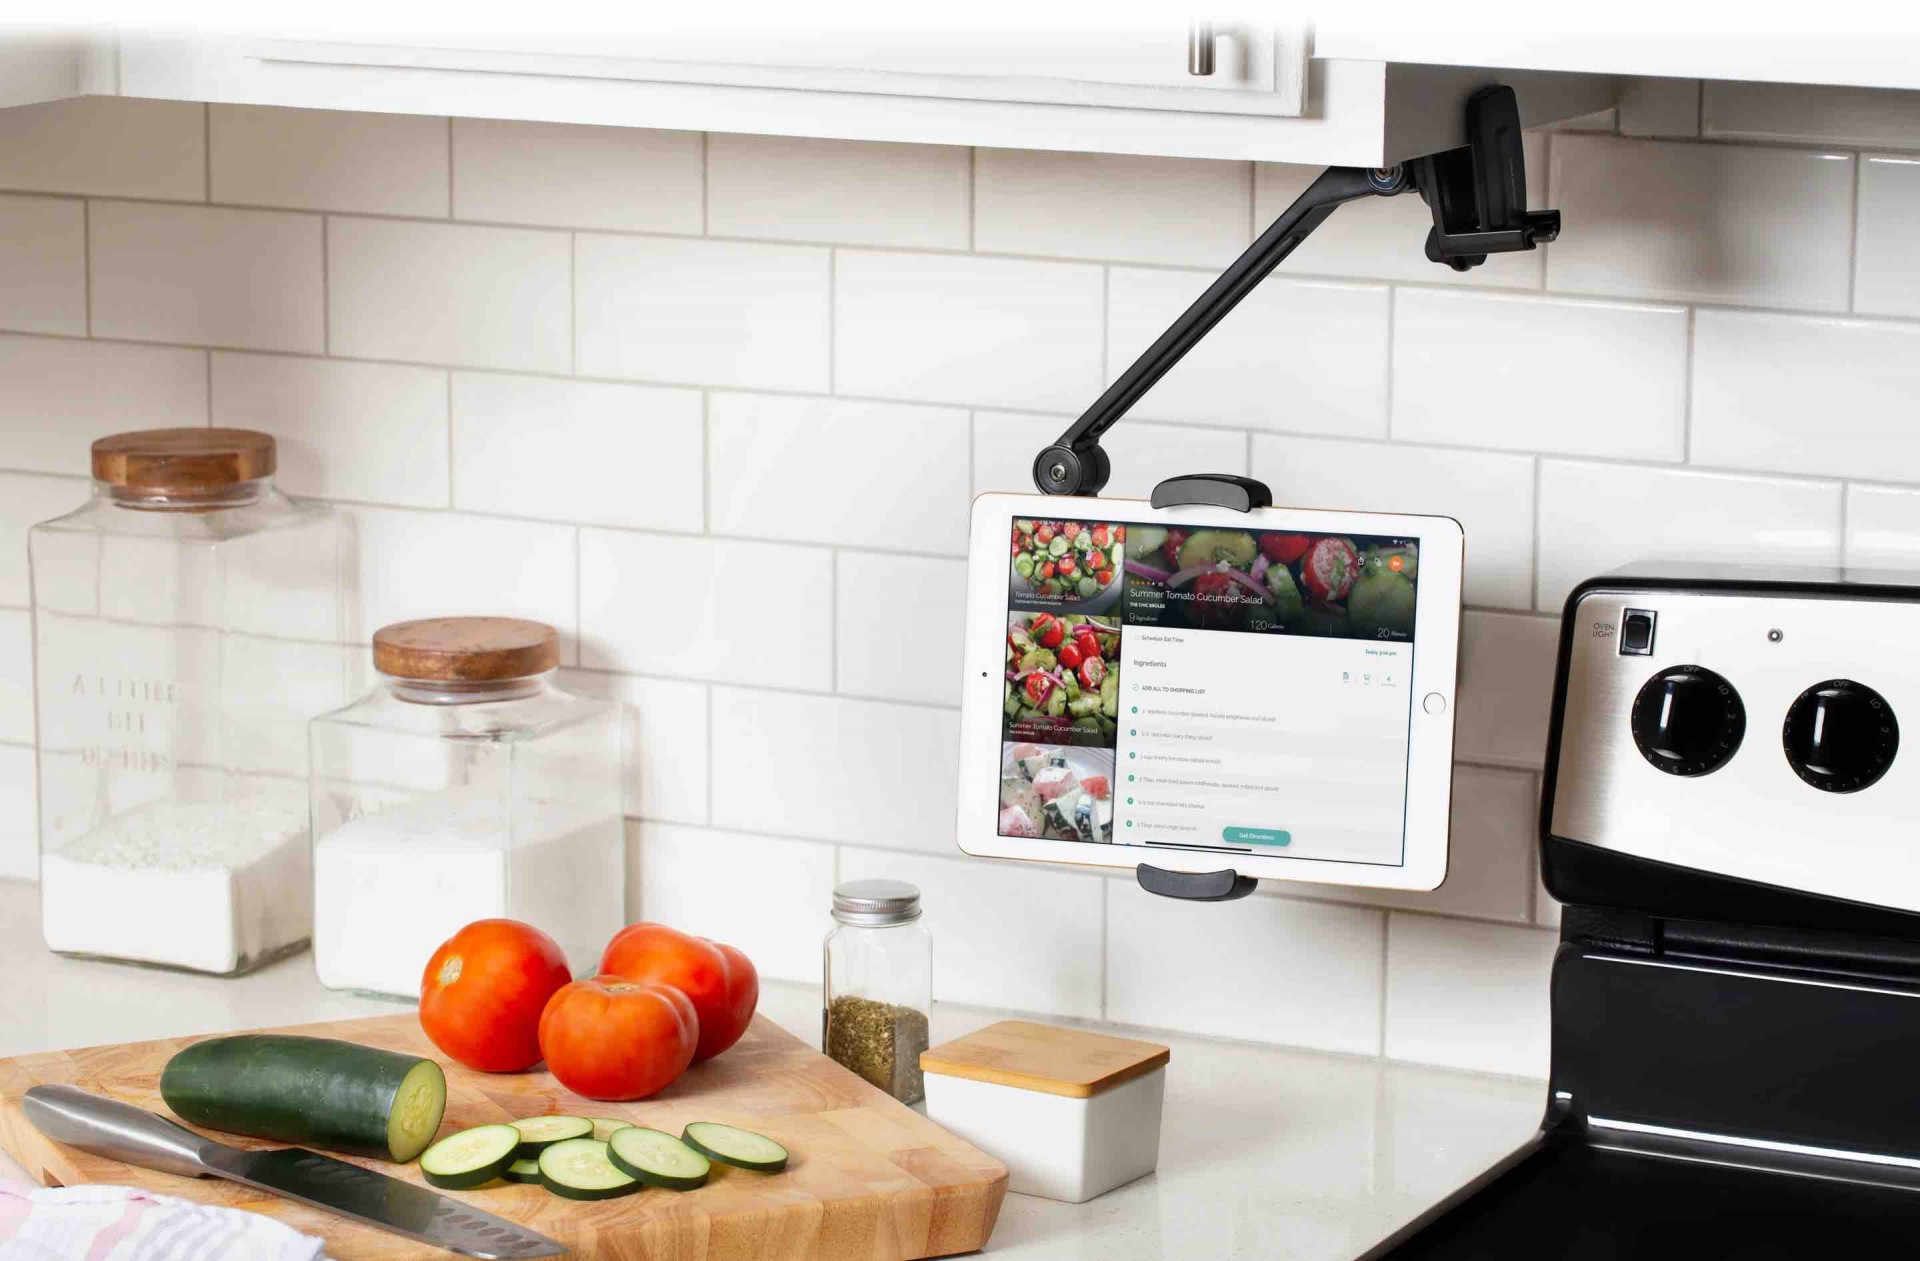 twelve-south-hoverbar-duo-ipad-stand-kitchen